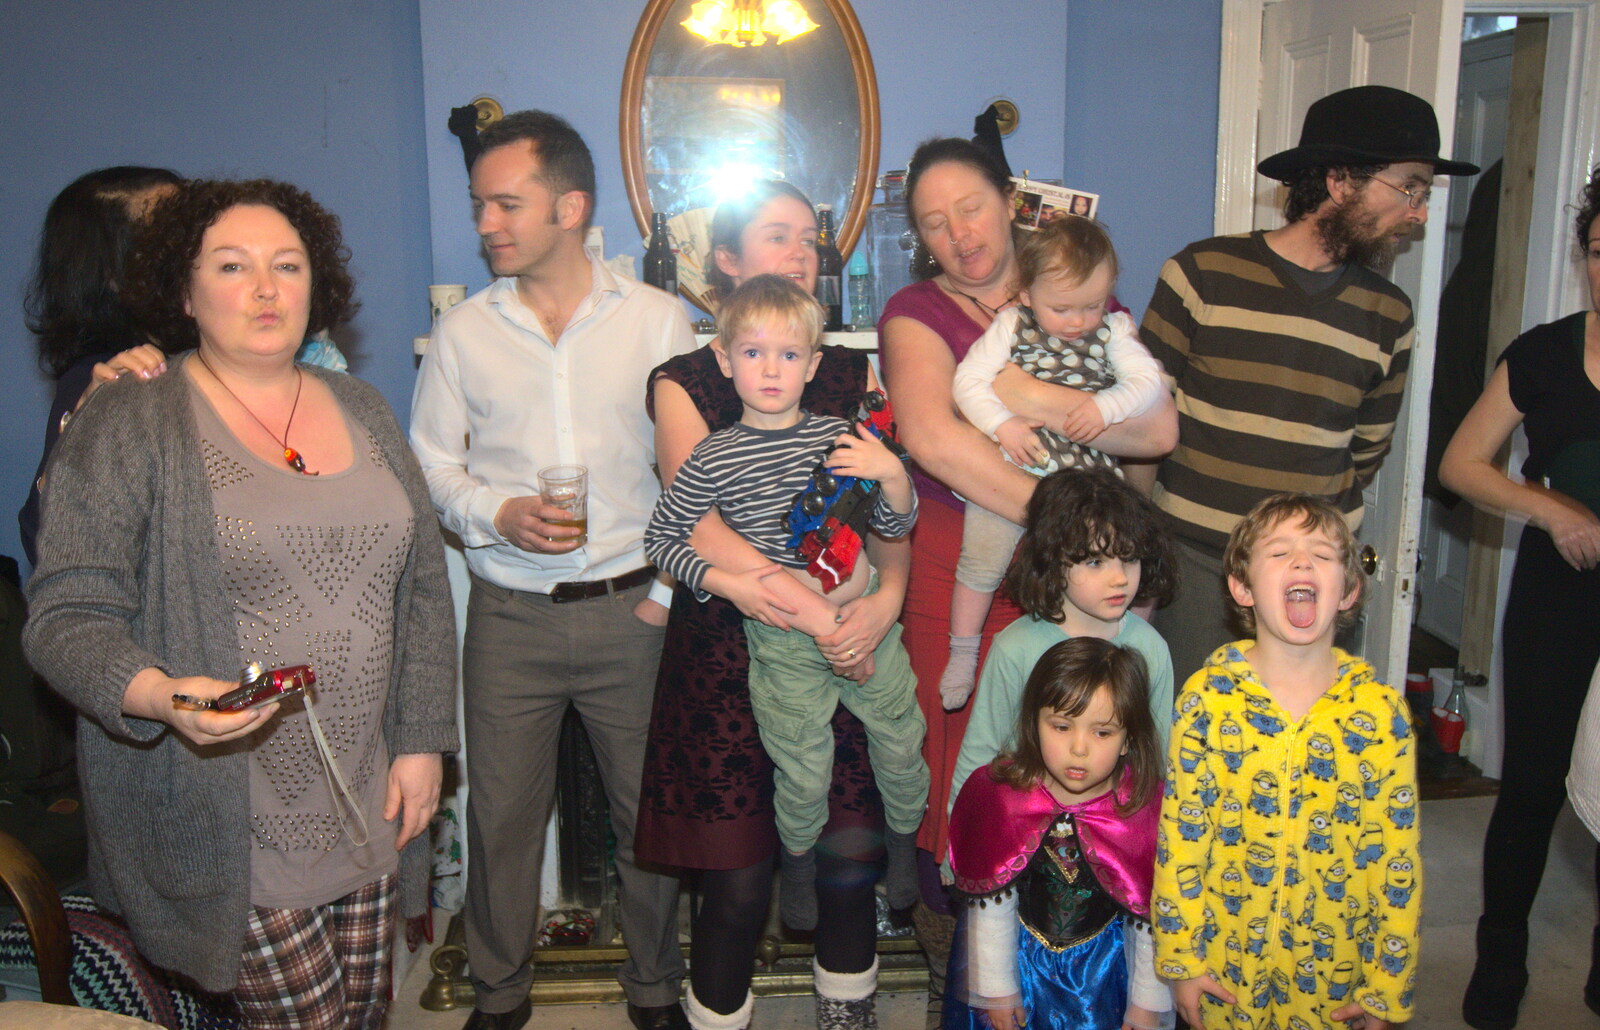 There's an attempt to do a family photo from Christmas in Blackrock and St. Stephen's in Ballybrack, Dublin, Ireland - 25th December 2015